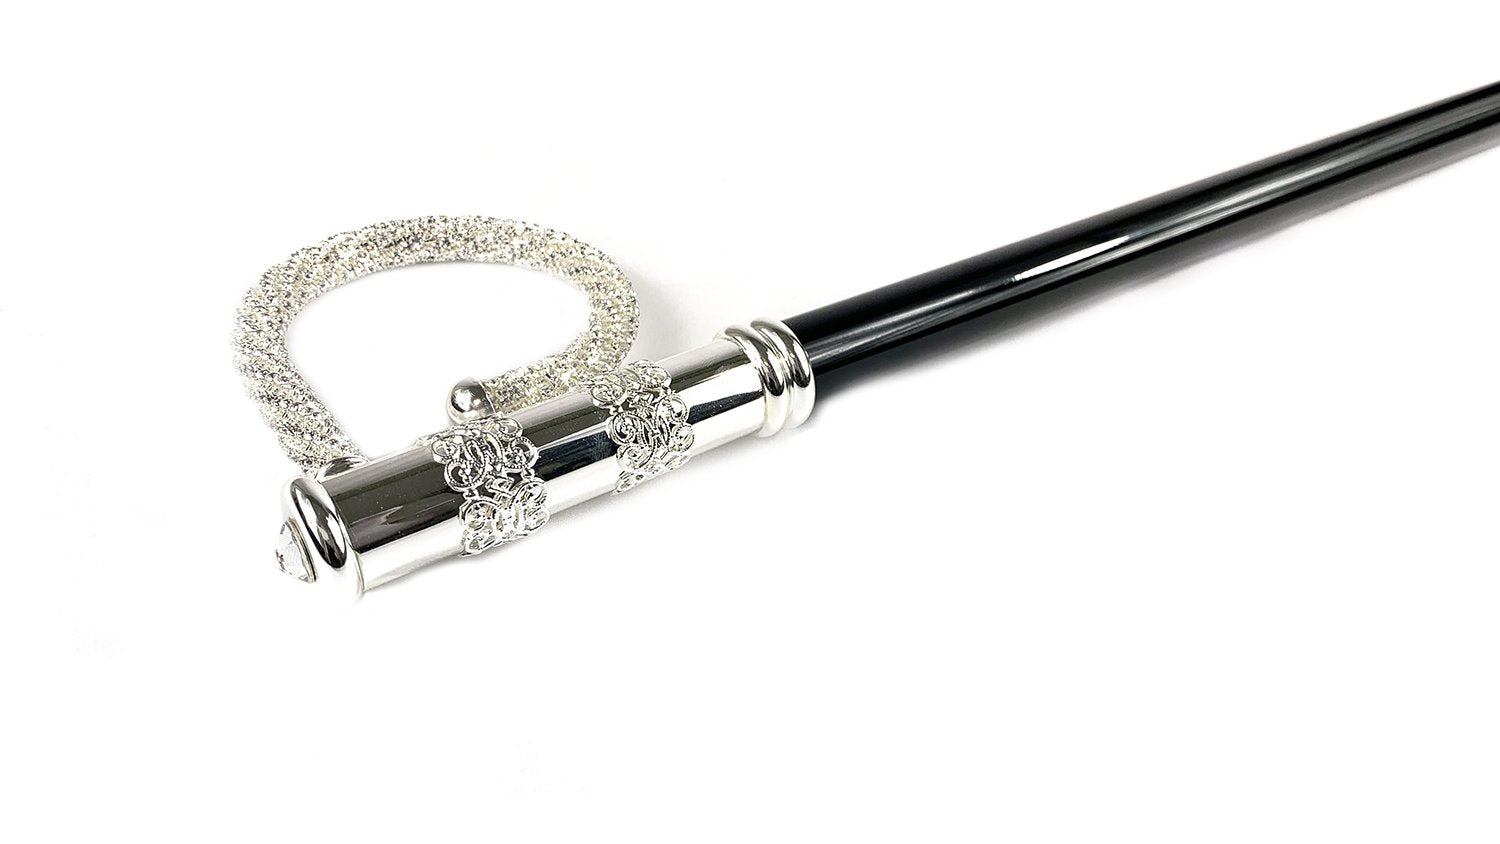 Beauty Walking stick with crystals - Silver-plated 925 - IL MARCHESATO LUXURY UMBRELLAS, CANES AND SHOEHORNS